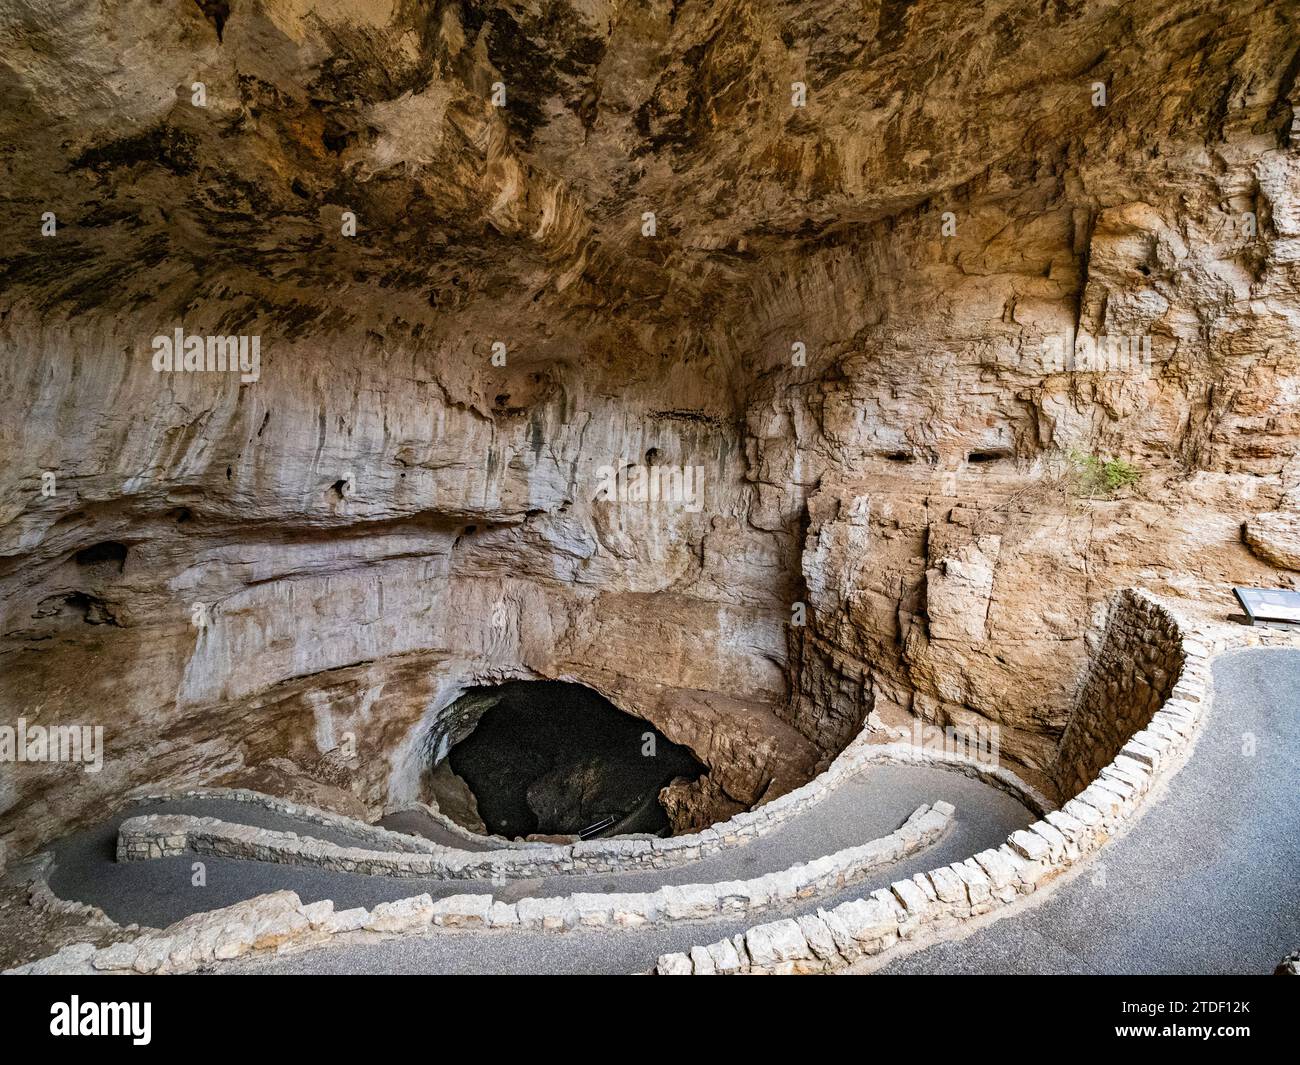 Entrance to the main cave at Carlsbad Caverns National Park,UNESCO World Heritage Site, located in the Guadalupe Mountains, New Mexico Stock Photo